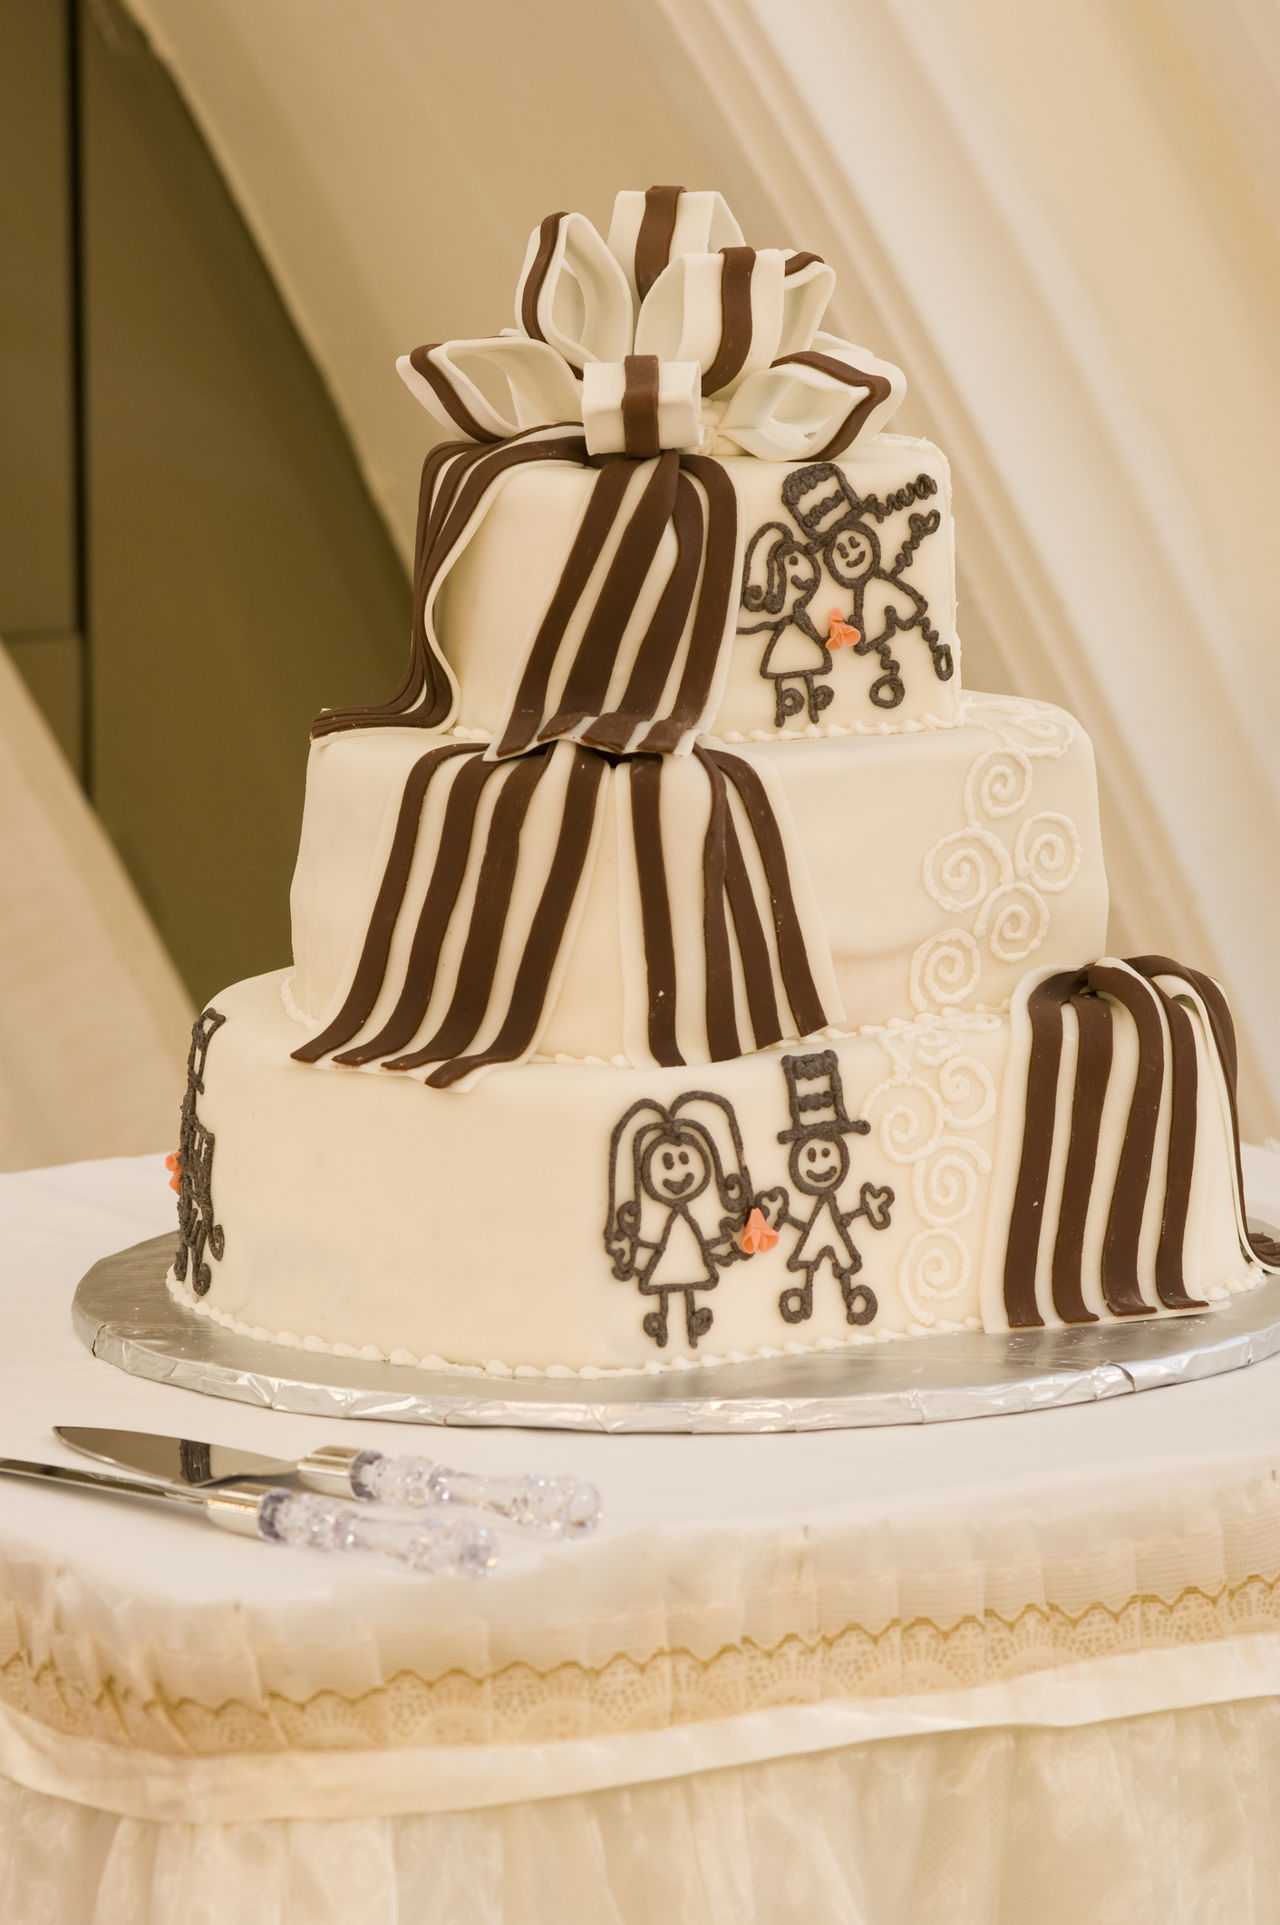 Bake Your Own Wedding  Cake  From Scratch  With These Great 